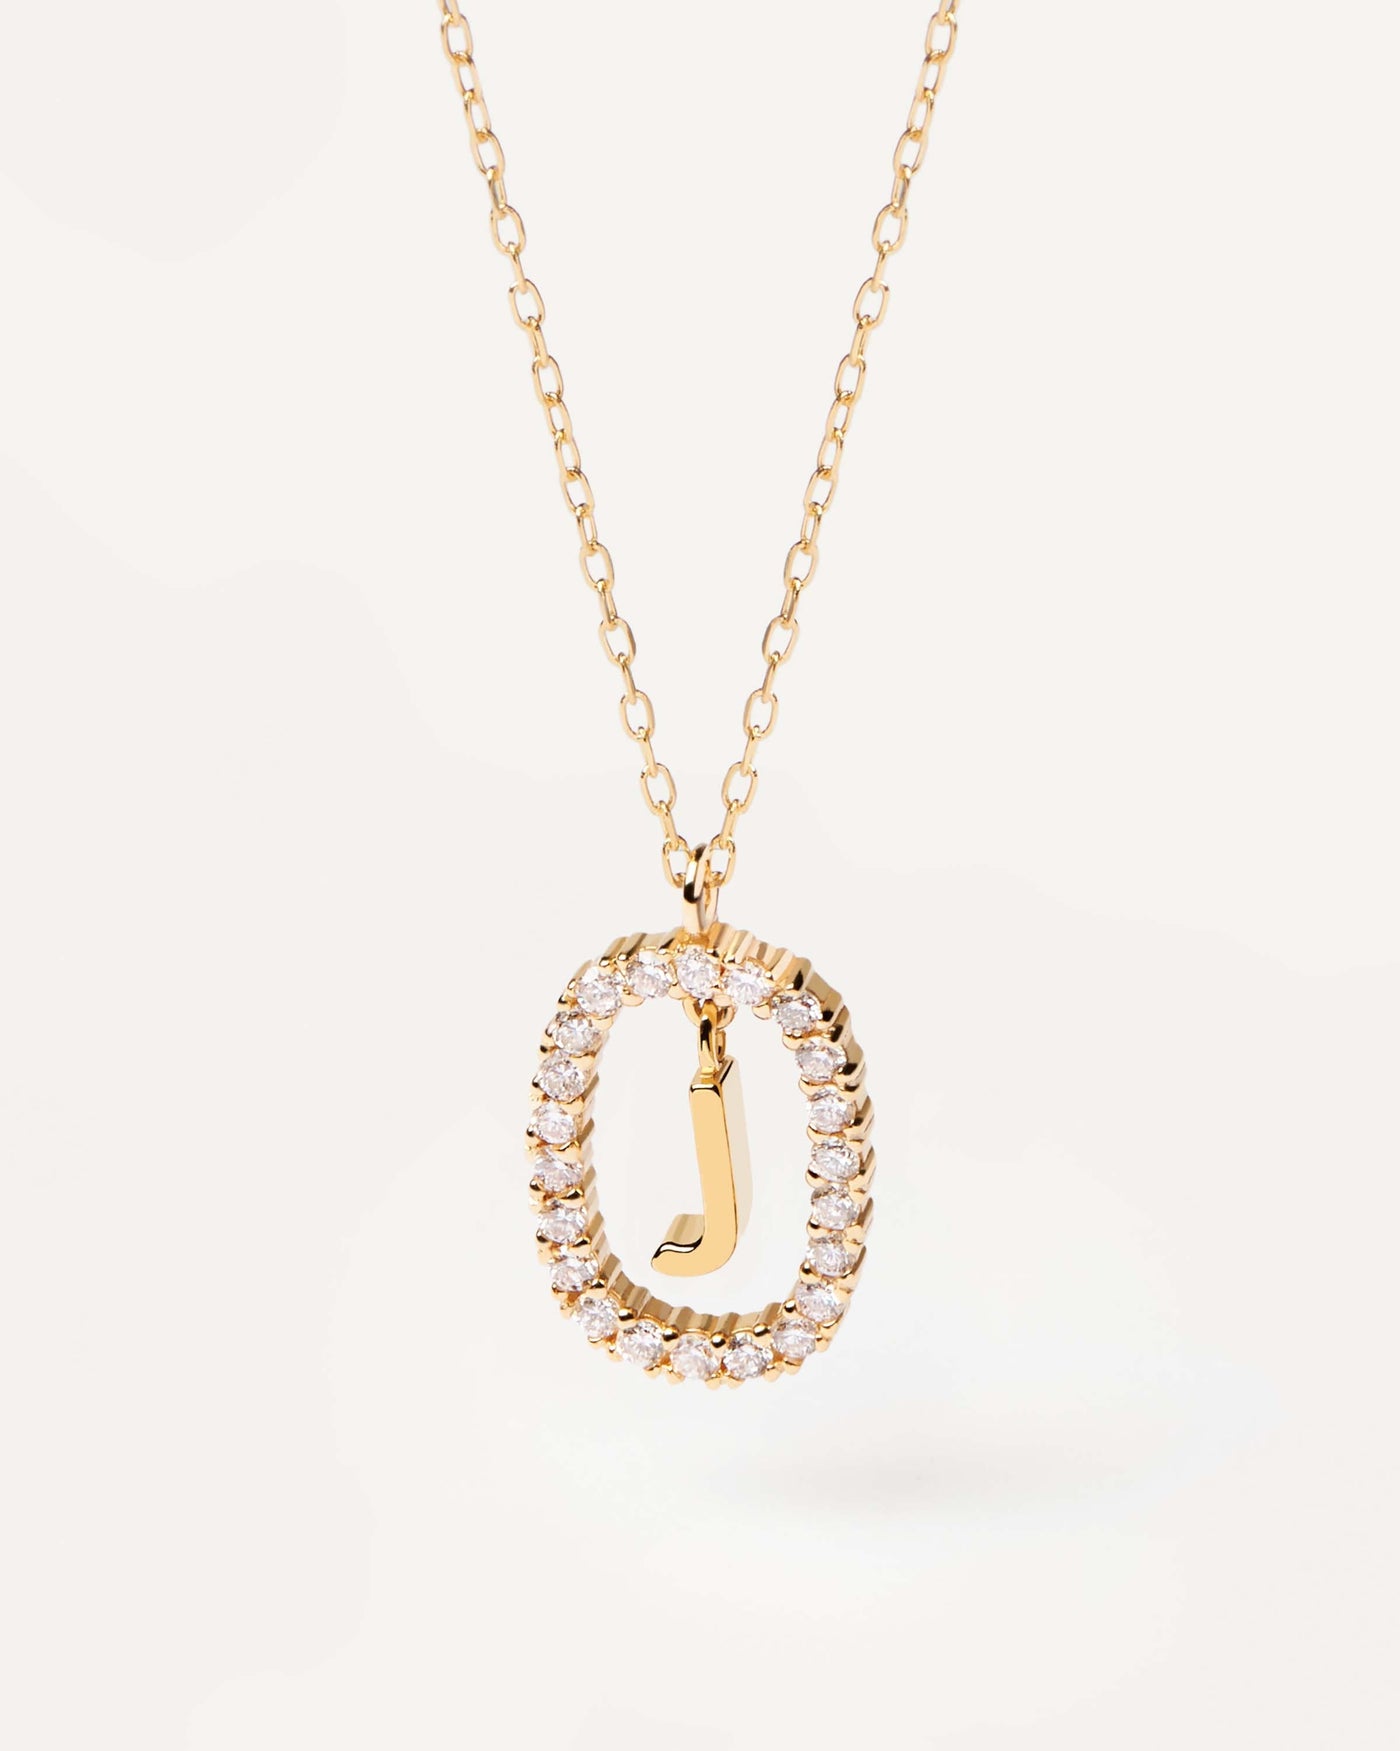 2024 Selection | Diamonds and Gold Letter J Necklace. Initial J necklace in solid yellow gold, circled by 0.33 carats lab-grown diamonds. Get the latest arrival from PDPAOLA. Place your order safely and get this Best Seller. Free Shipping.